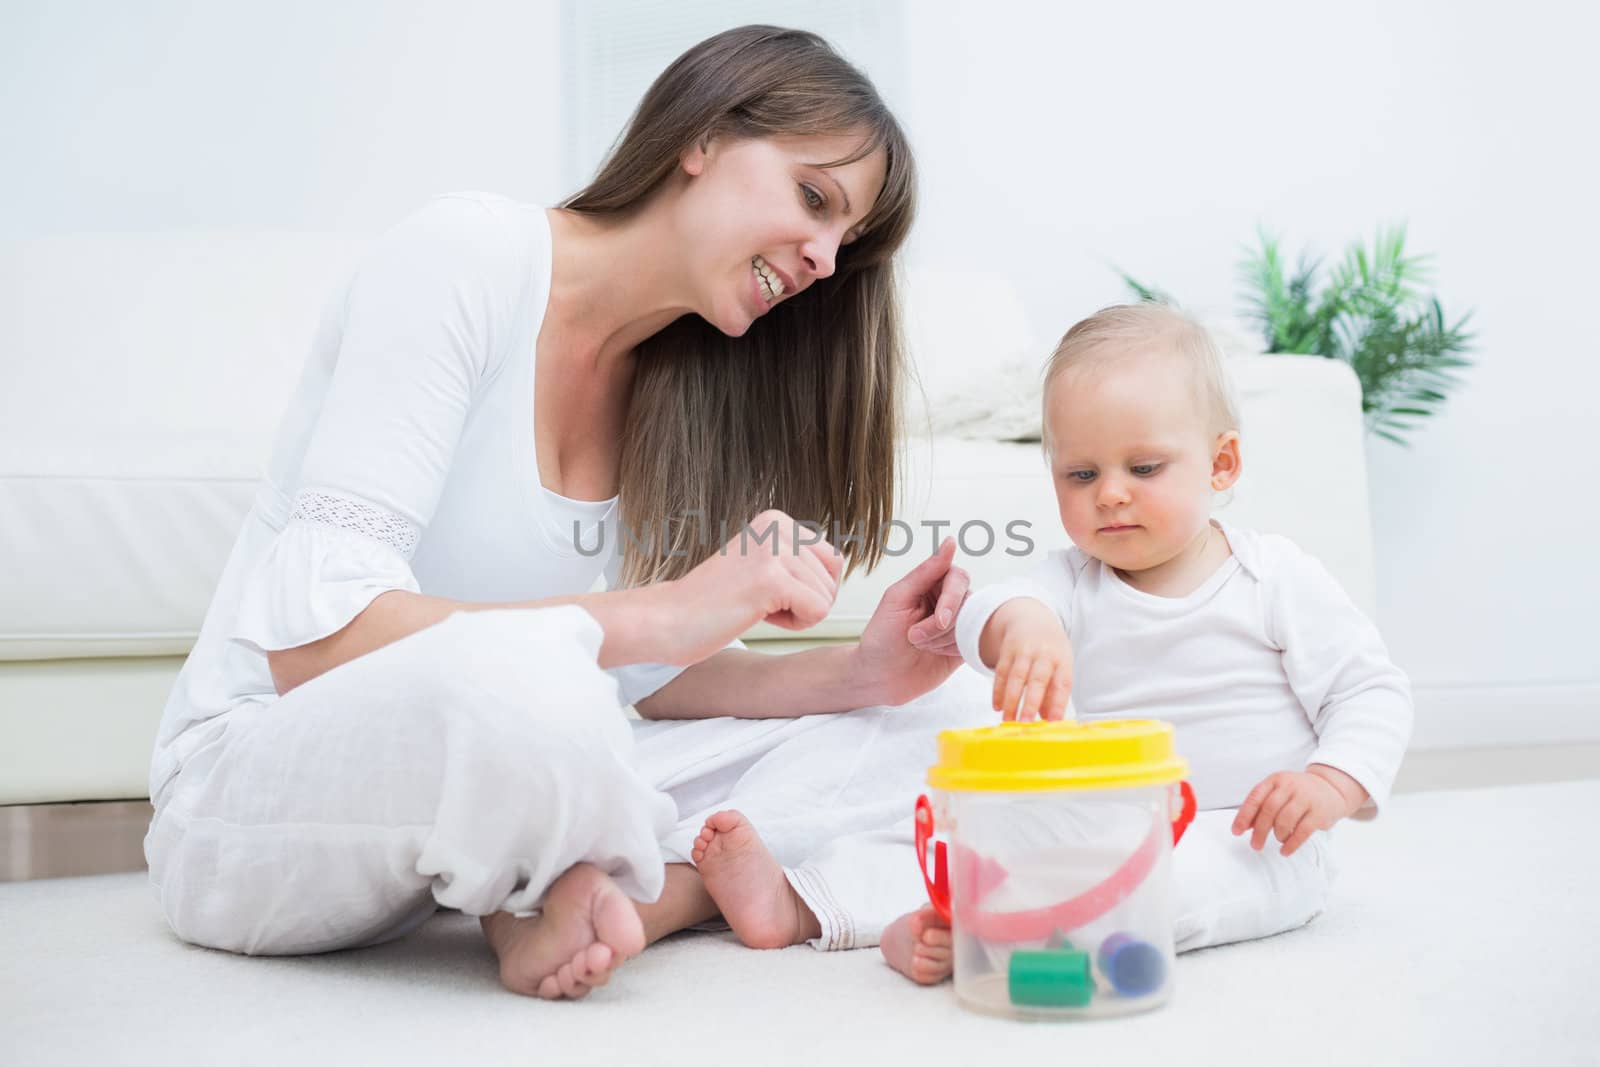 Mother sitting next to a baby playing in living room